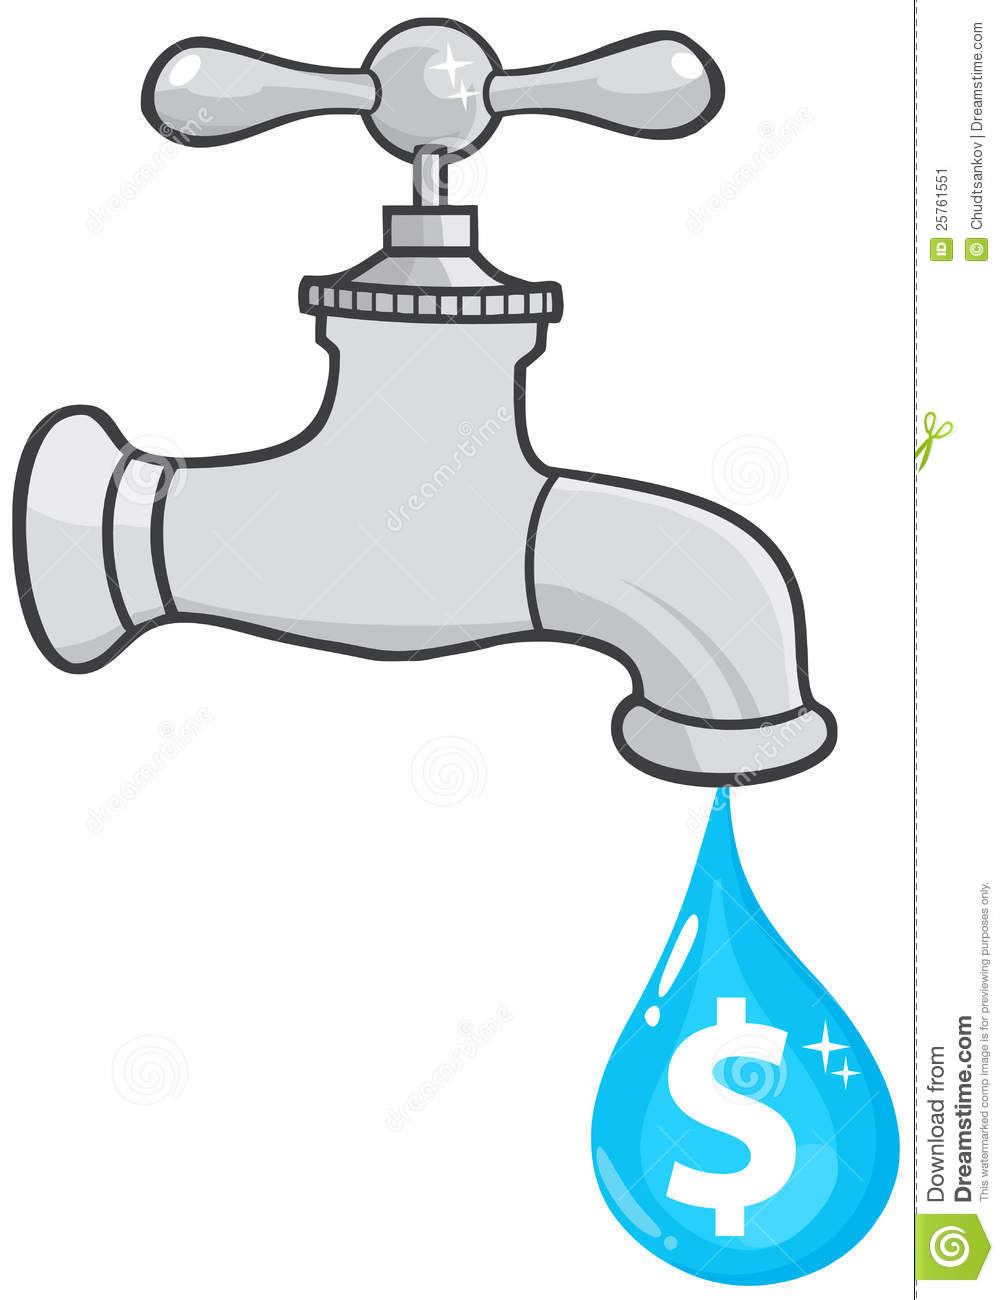 Water Faucet With Dollar Dripping Stock Image   Image  25761551